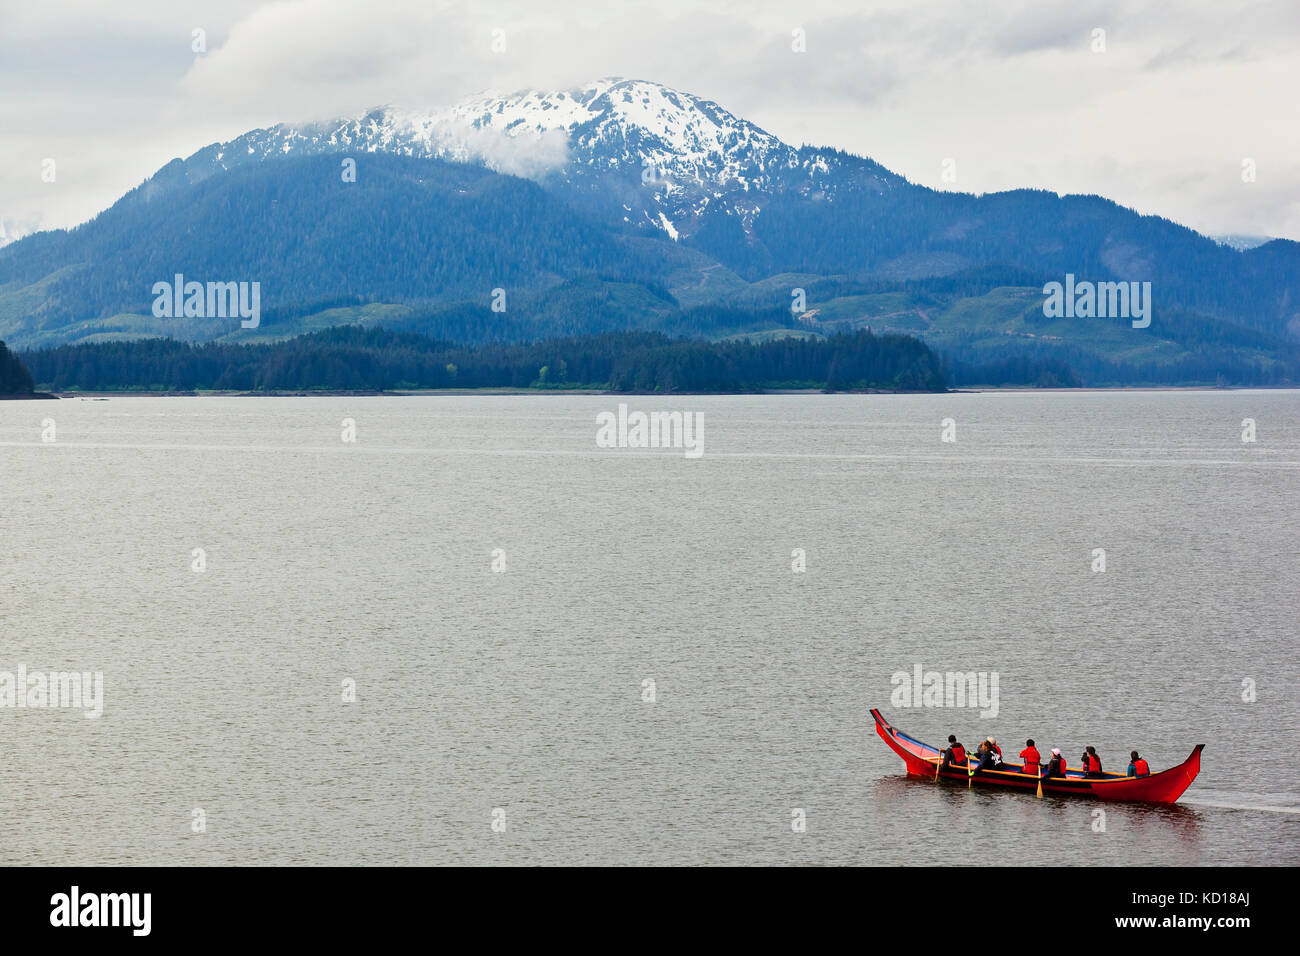 Hoonah townsfolk paddling a traditional Tlingit dugout canoe along the shoreline of Icy Strait Point, Alaska, U.S.A. Stock Photo